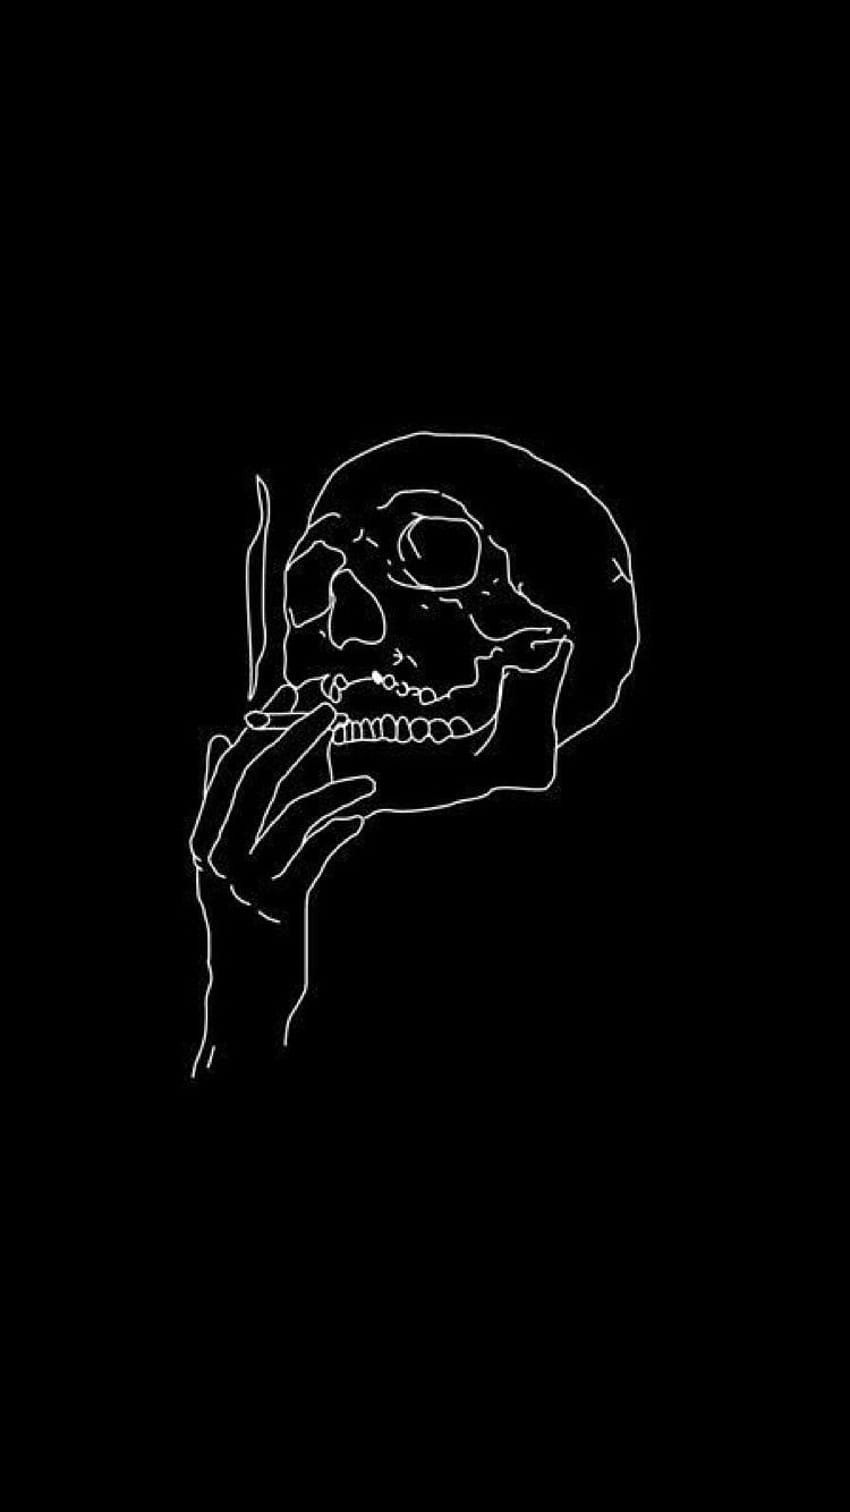 A black and white drawing of the skull with smoke - Smoke